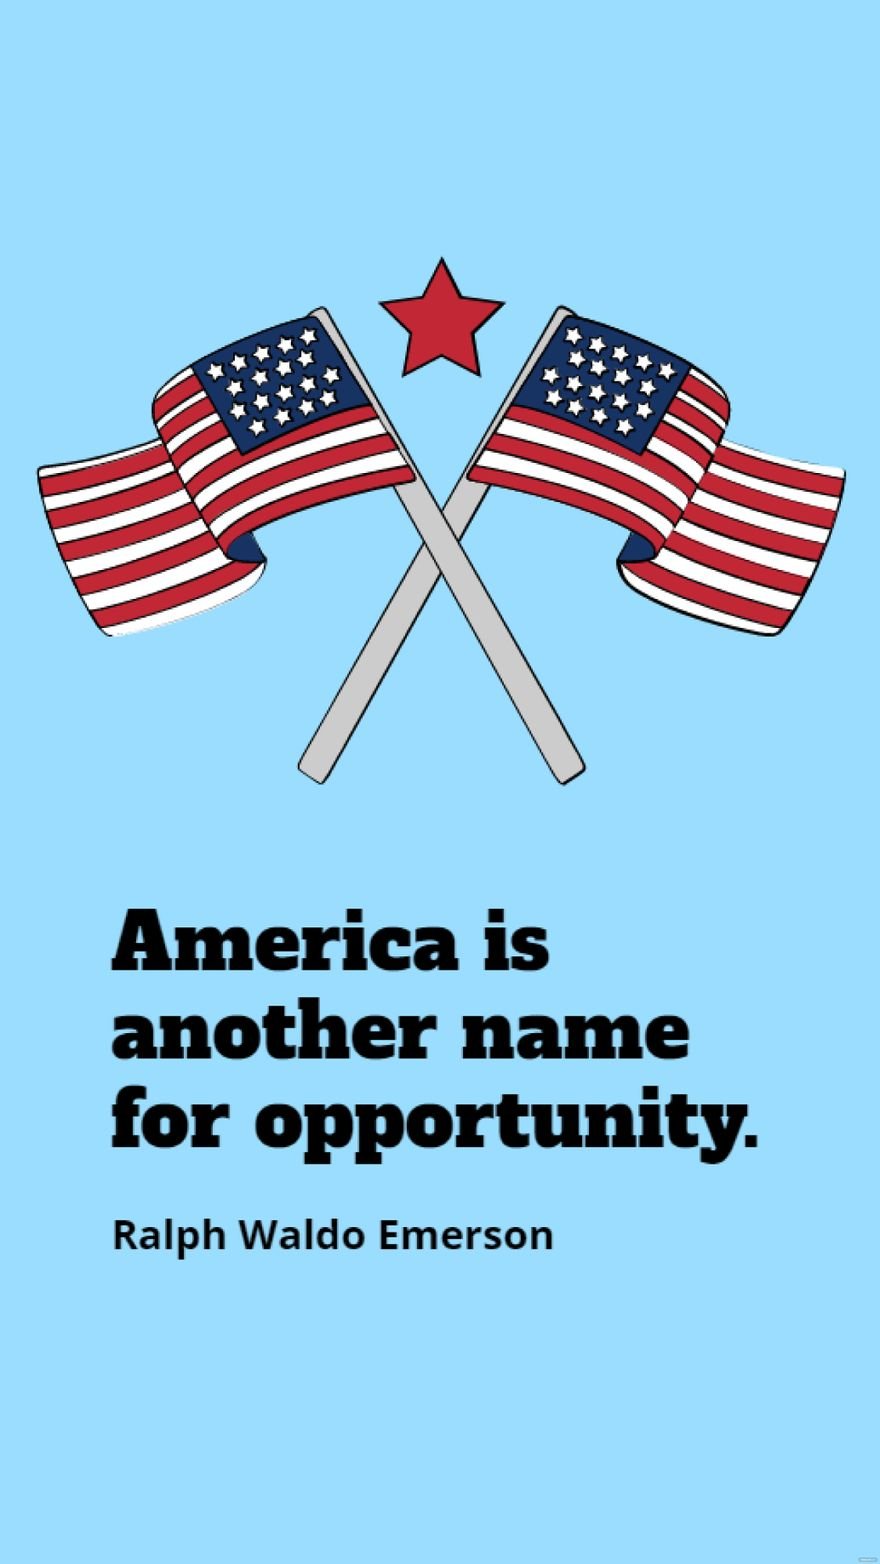 Ralph Waldo Emerson - America is another name for opportunity.